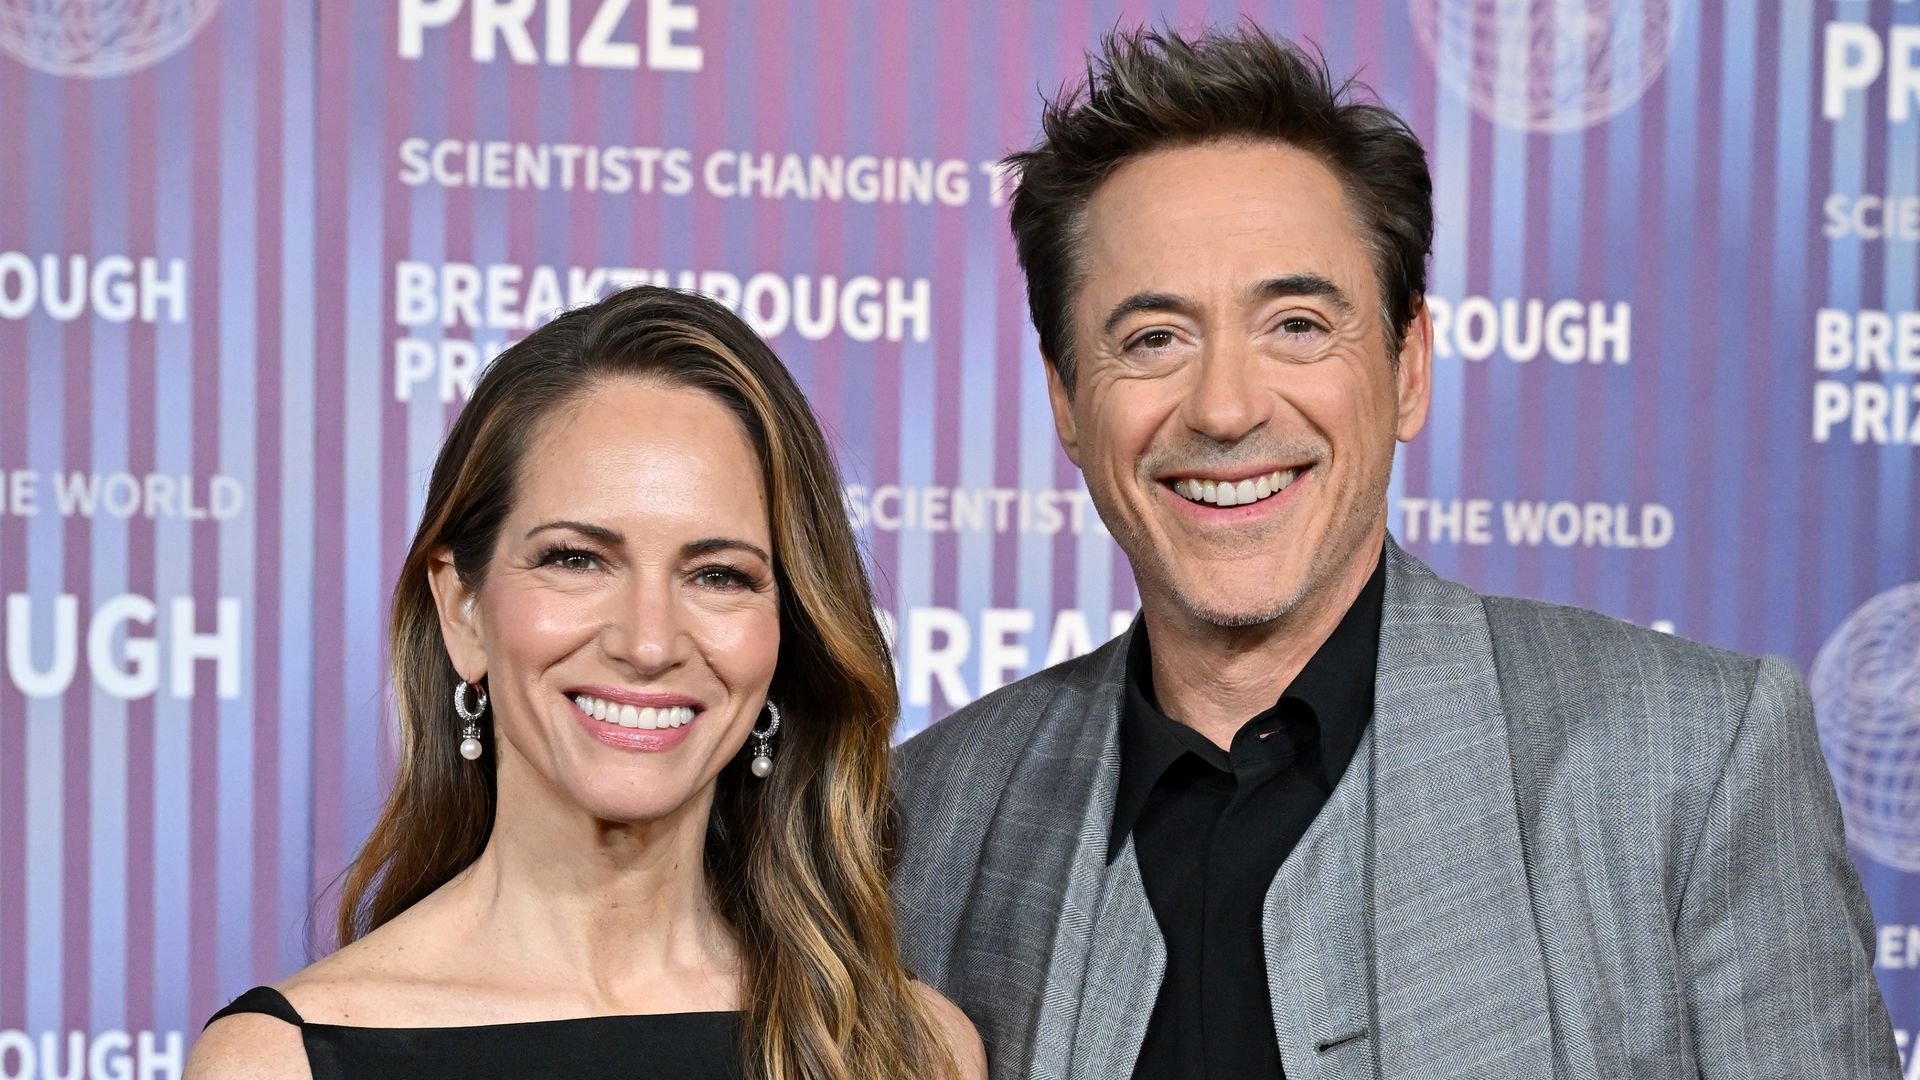 Robert Downey Jr. sparks reaction with major announcement with wife Susan Downey: 'I'll knock the dust off quick'